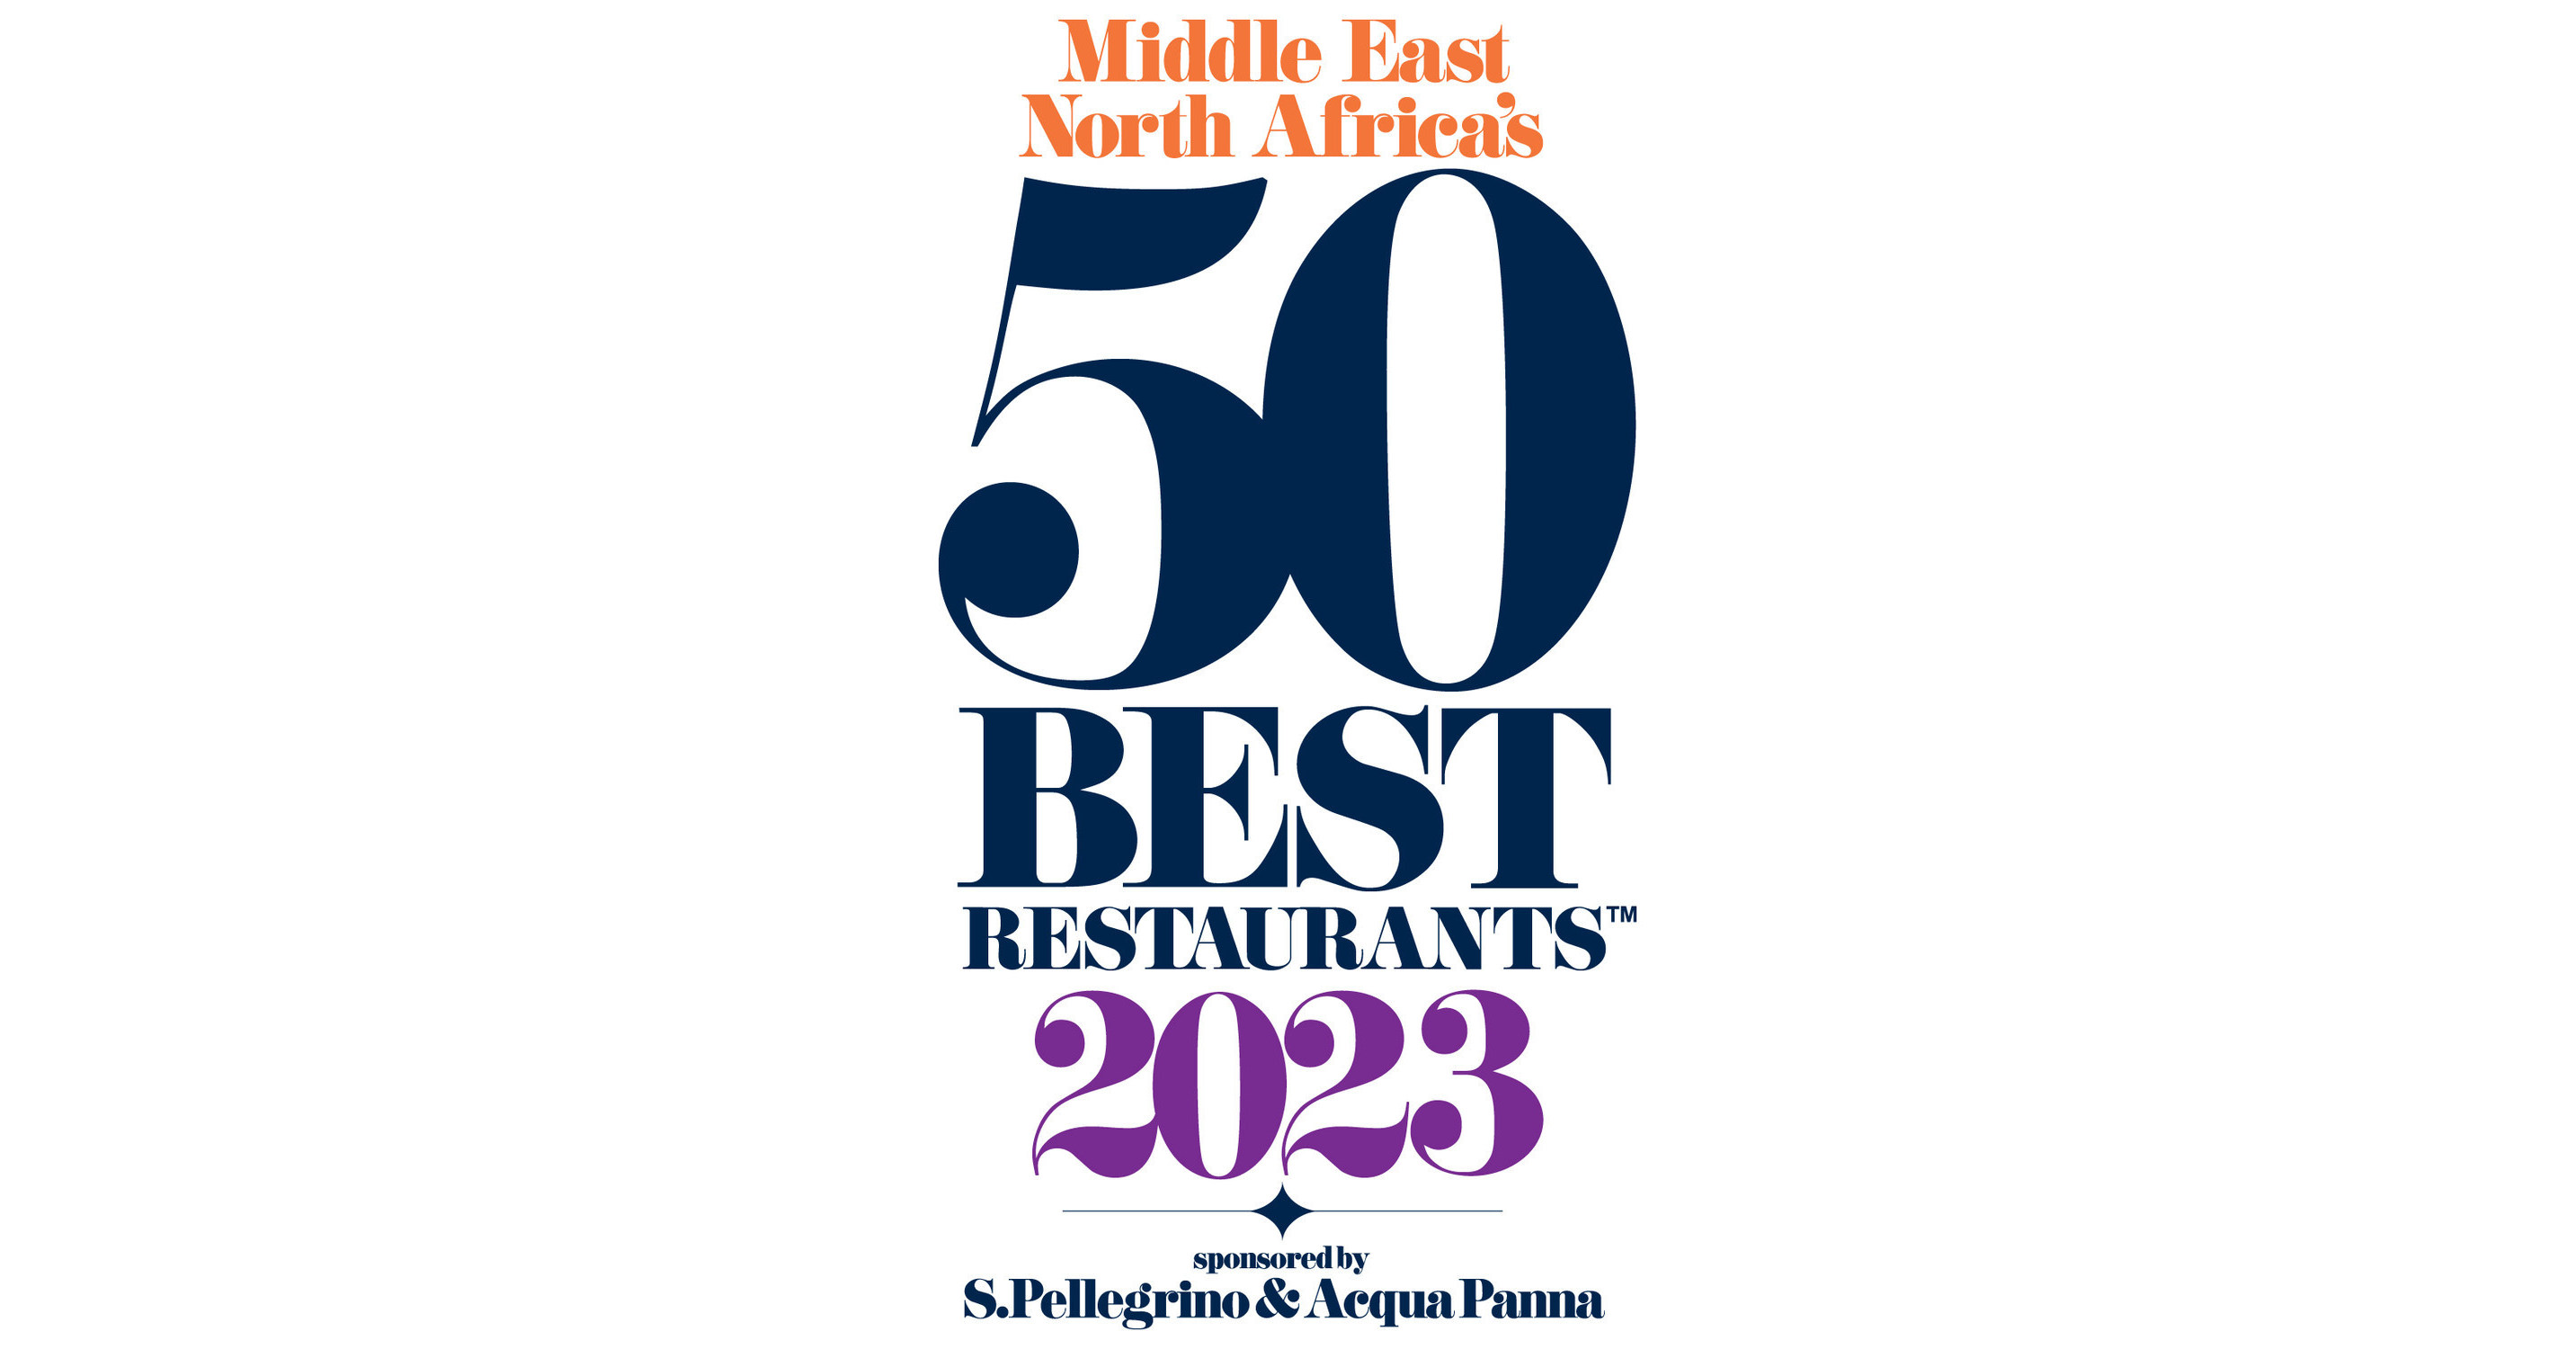 MIDDLE EAST & NORTH AFRICA'S 50 BEST RESTAURANTS ANNOUNCES ANISSA HELOU